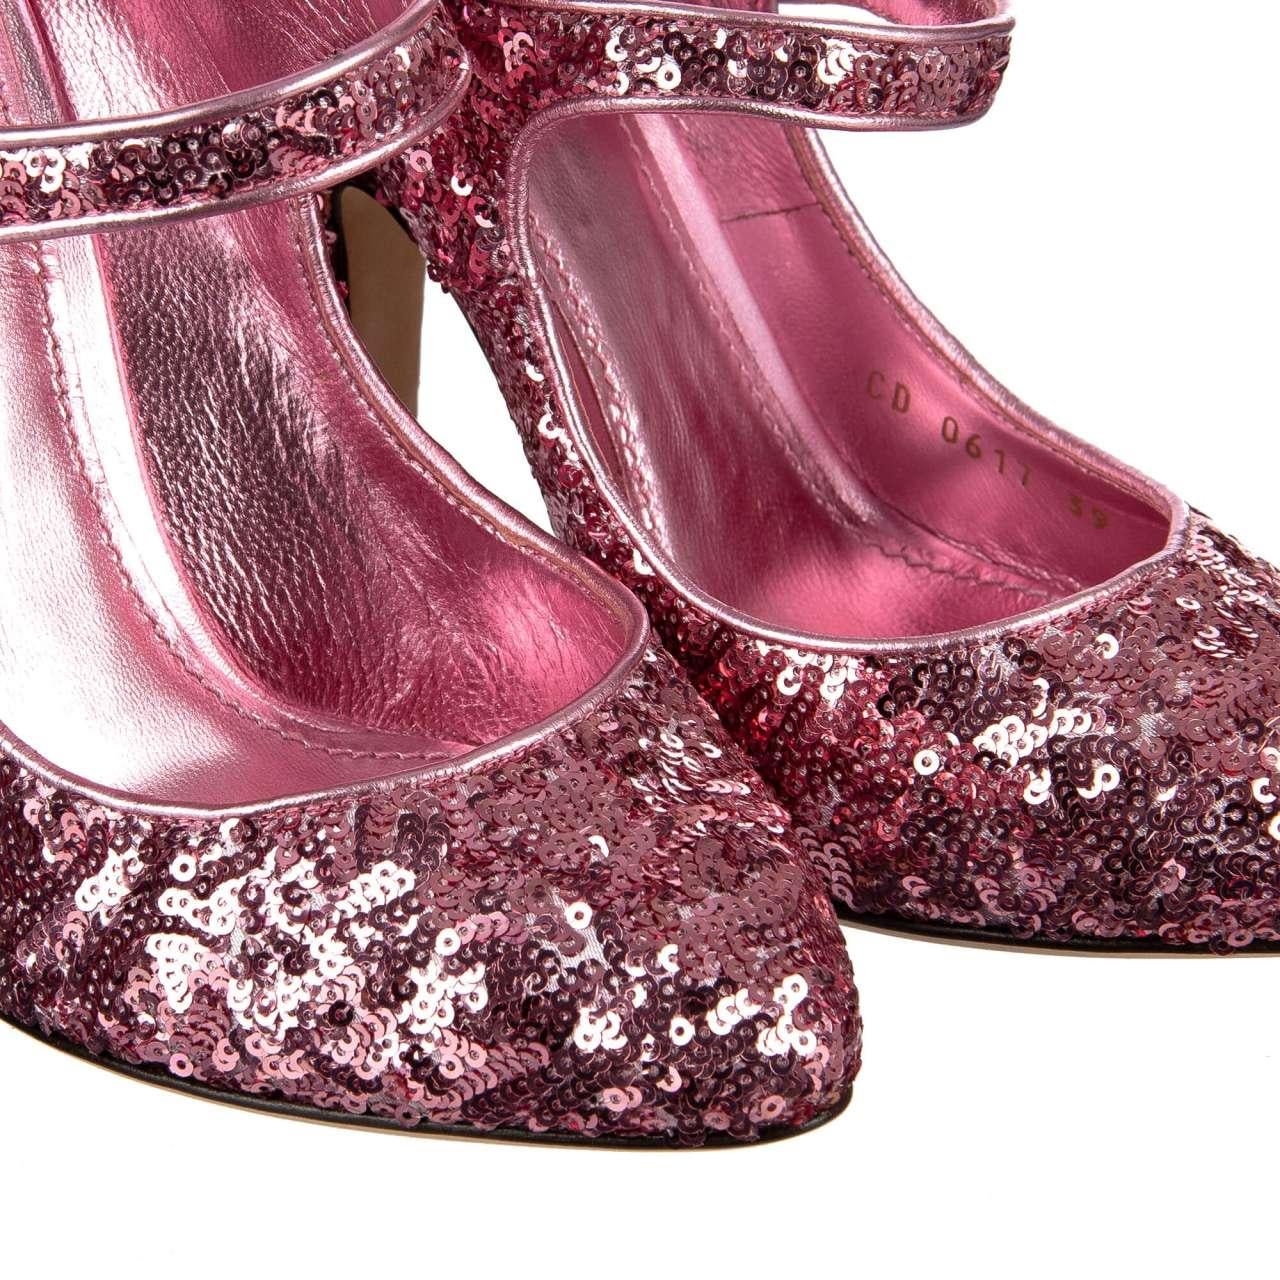 - Sequined Mary Jane Pumps VALLY in Pink by DOLCE & GABBANA Black Label - RUNWAY - Dolce & Gabbana Fashion Show - Former RRP: EUR 495 - MADE IN ITALY - New with box - Model: CD0617-AE427-8B404 - Material: 68% Polyester, 32% Lambskin - Inside